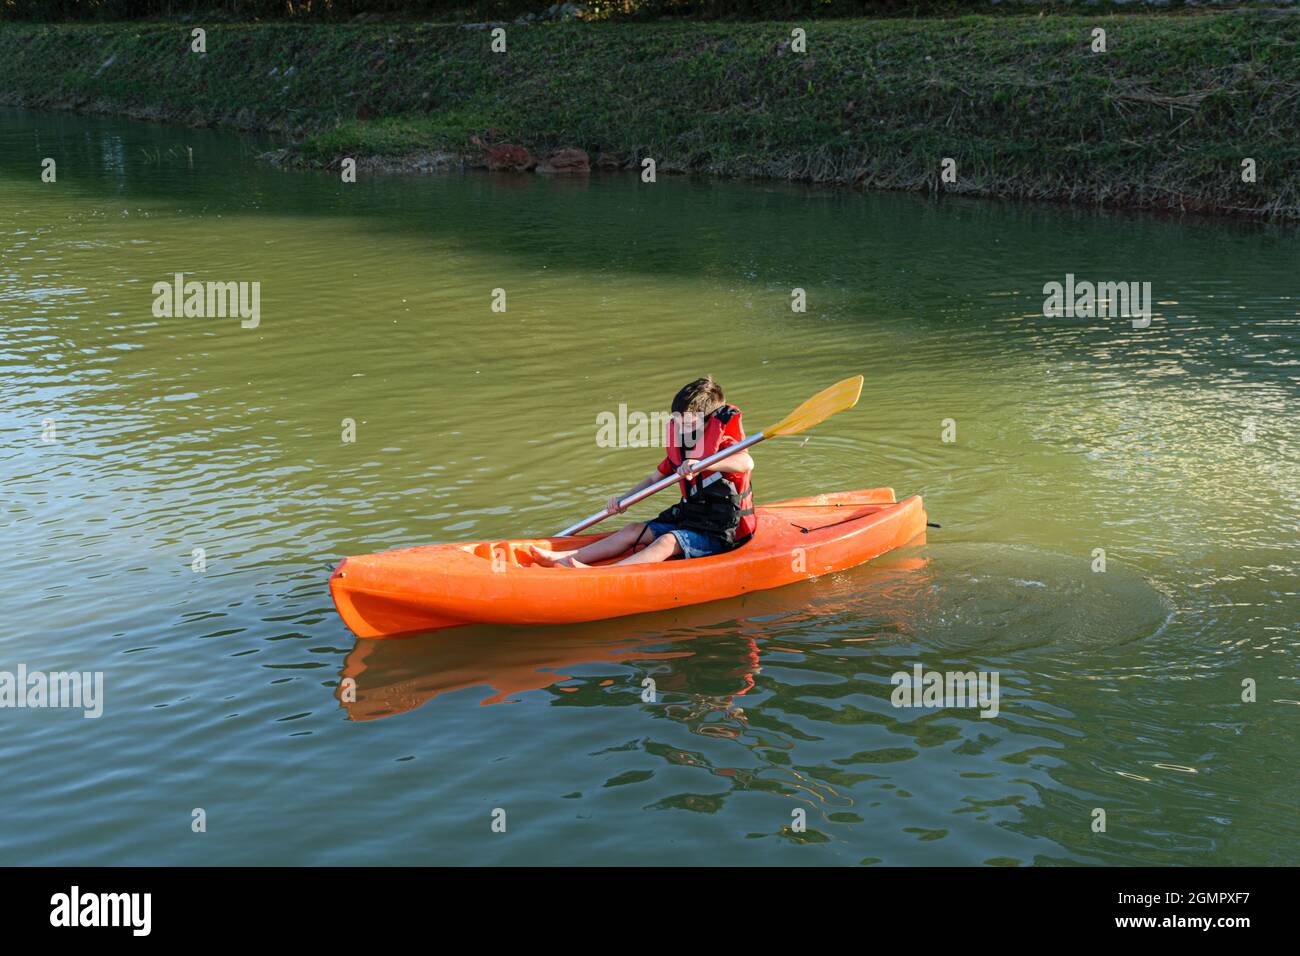 8 year old Brazilian child learning to use a kayak in a small river.d Stock Photo